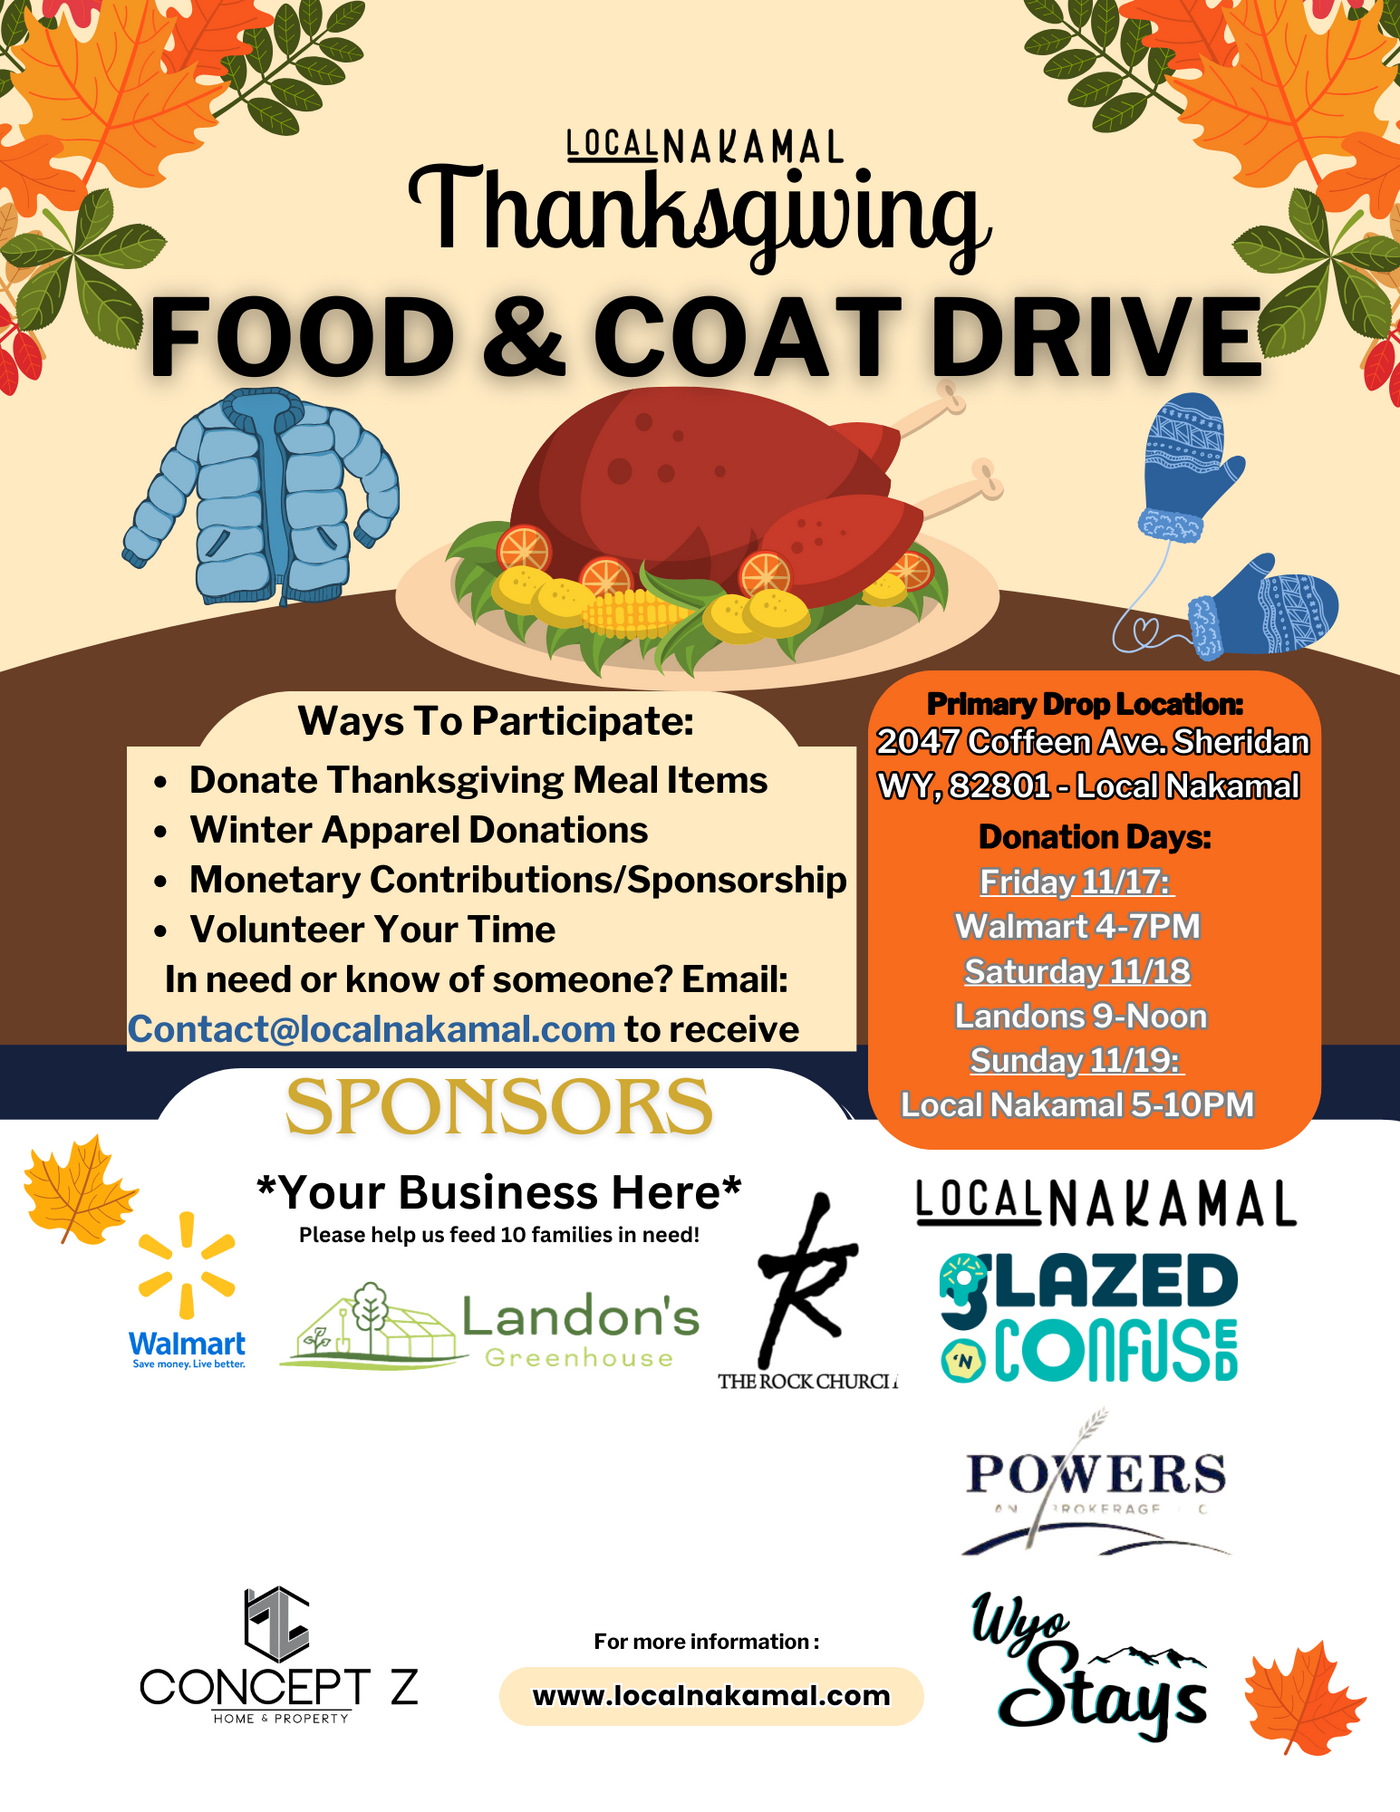 "Warmth & Gratitude: A Thanksgiving Goods Gathering by Local Nakamal"